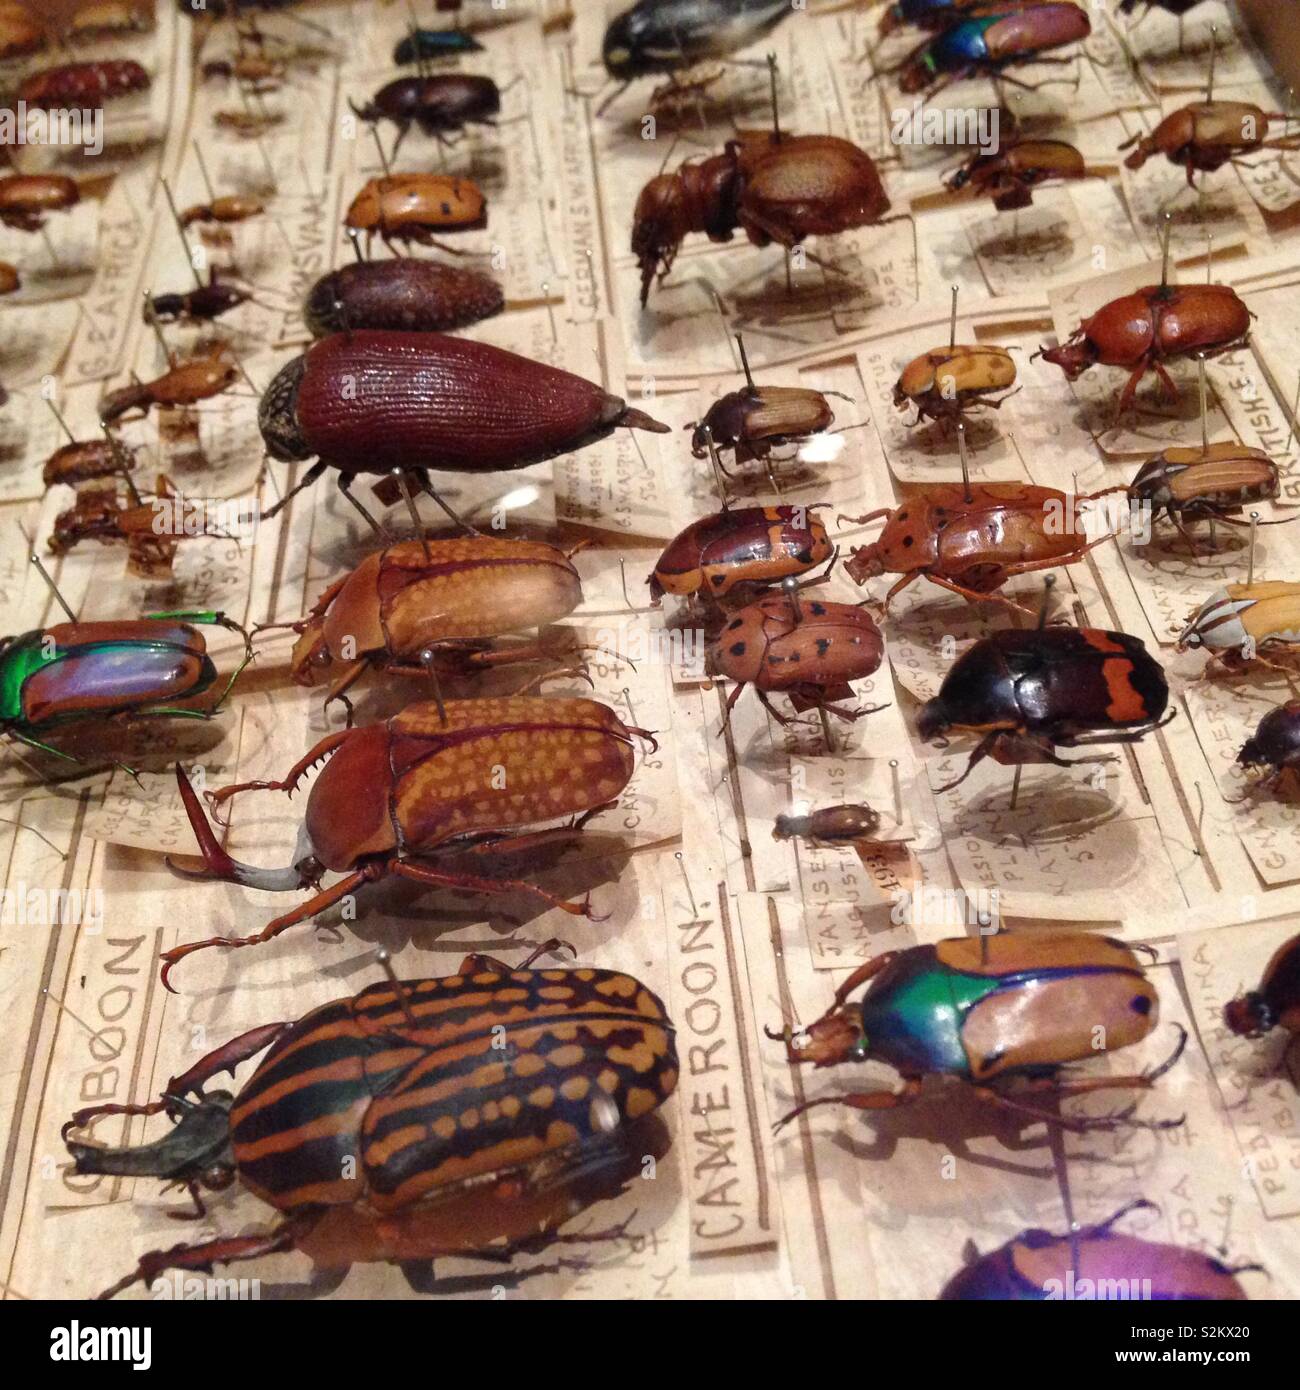 Beetle collection Stock Photo